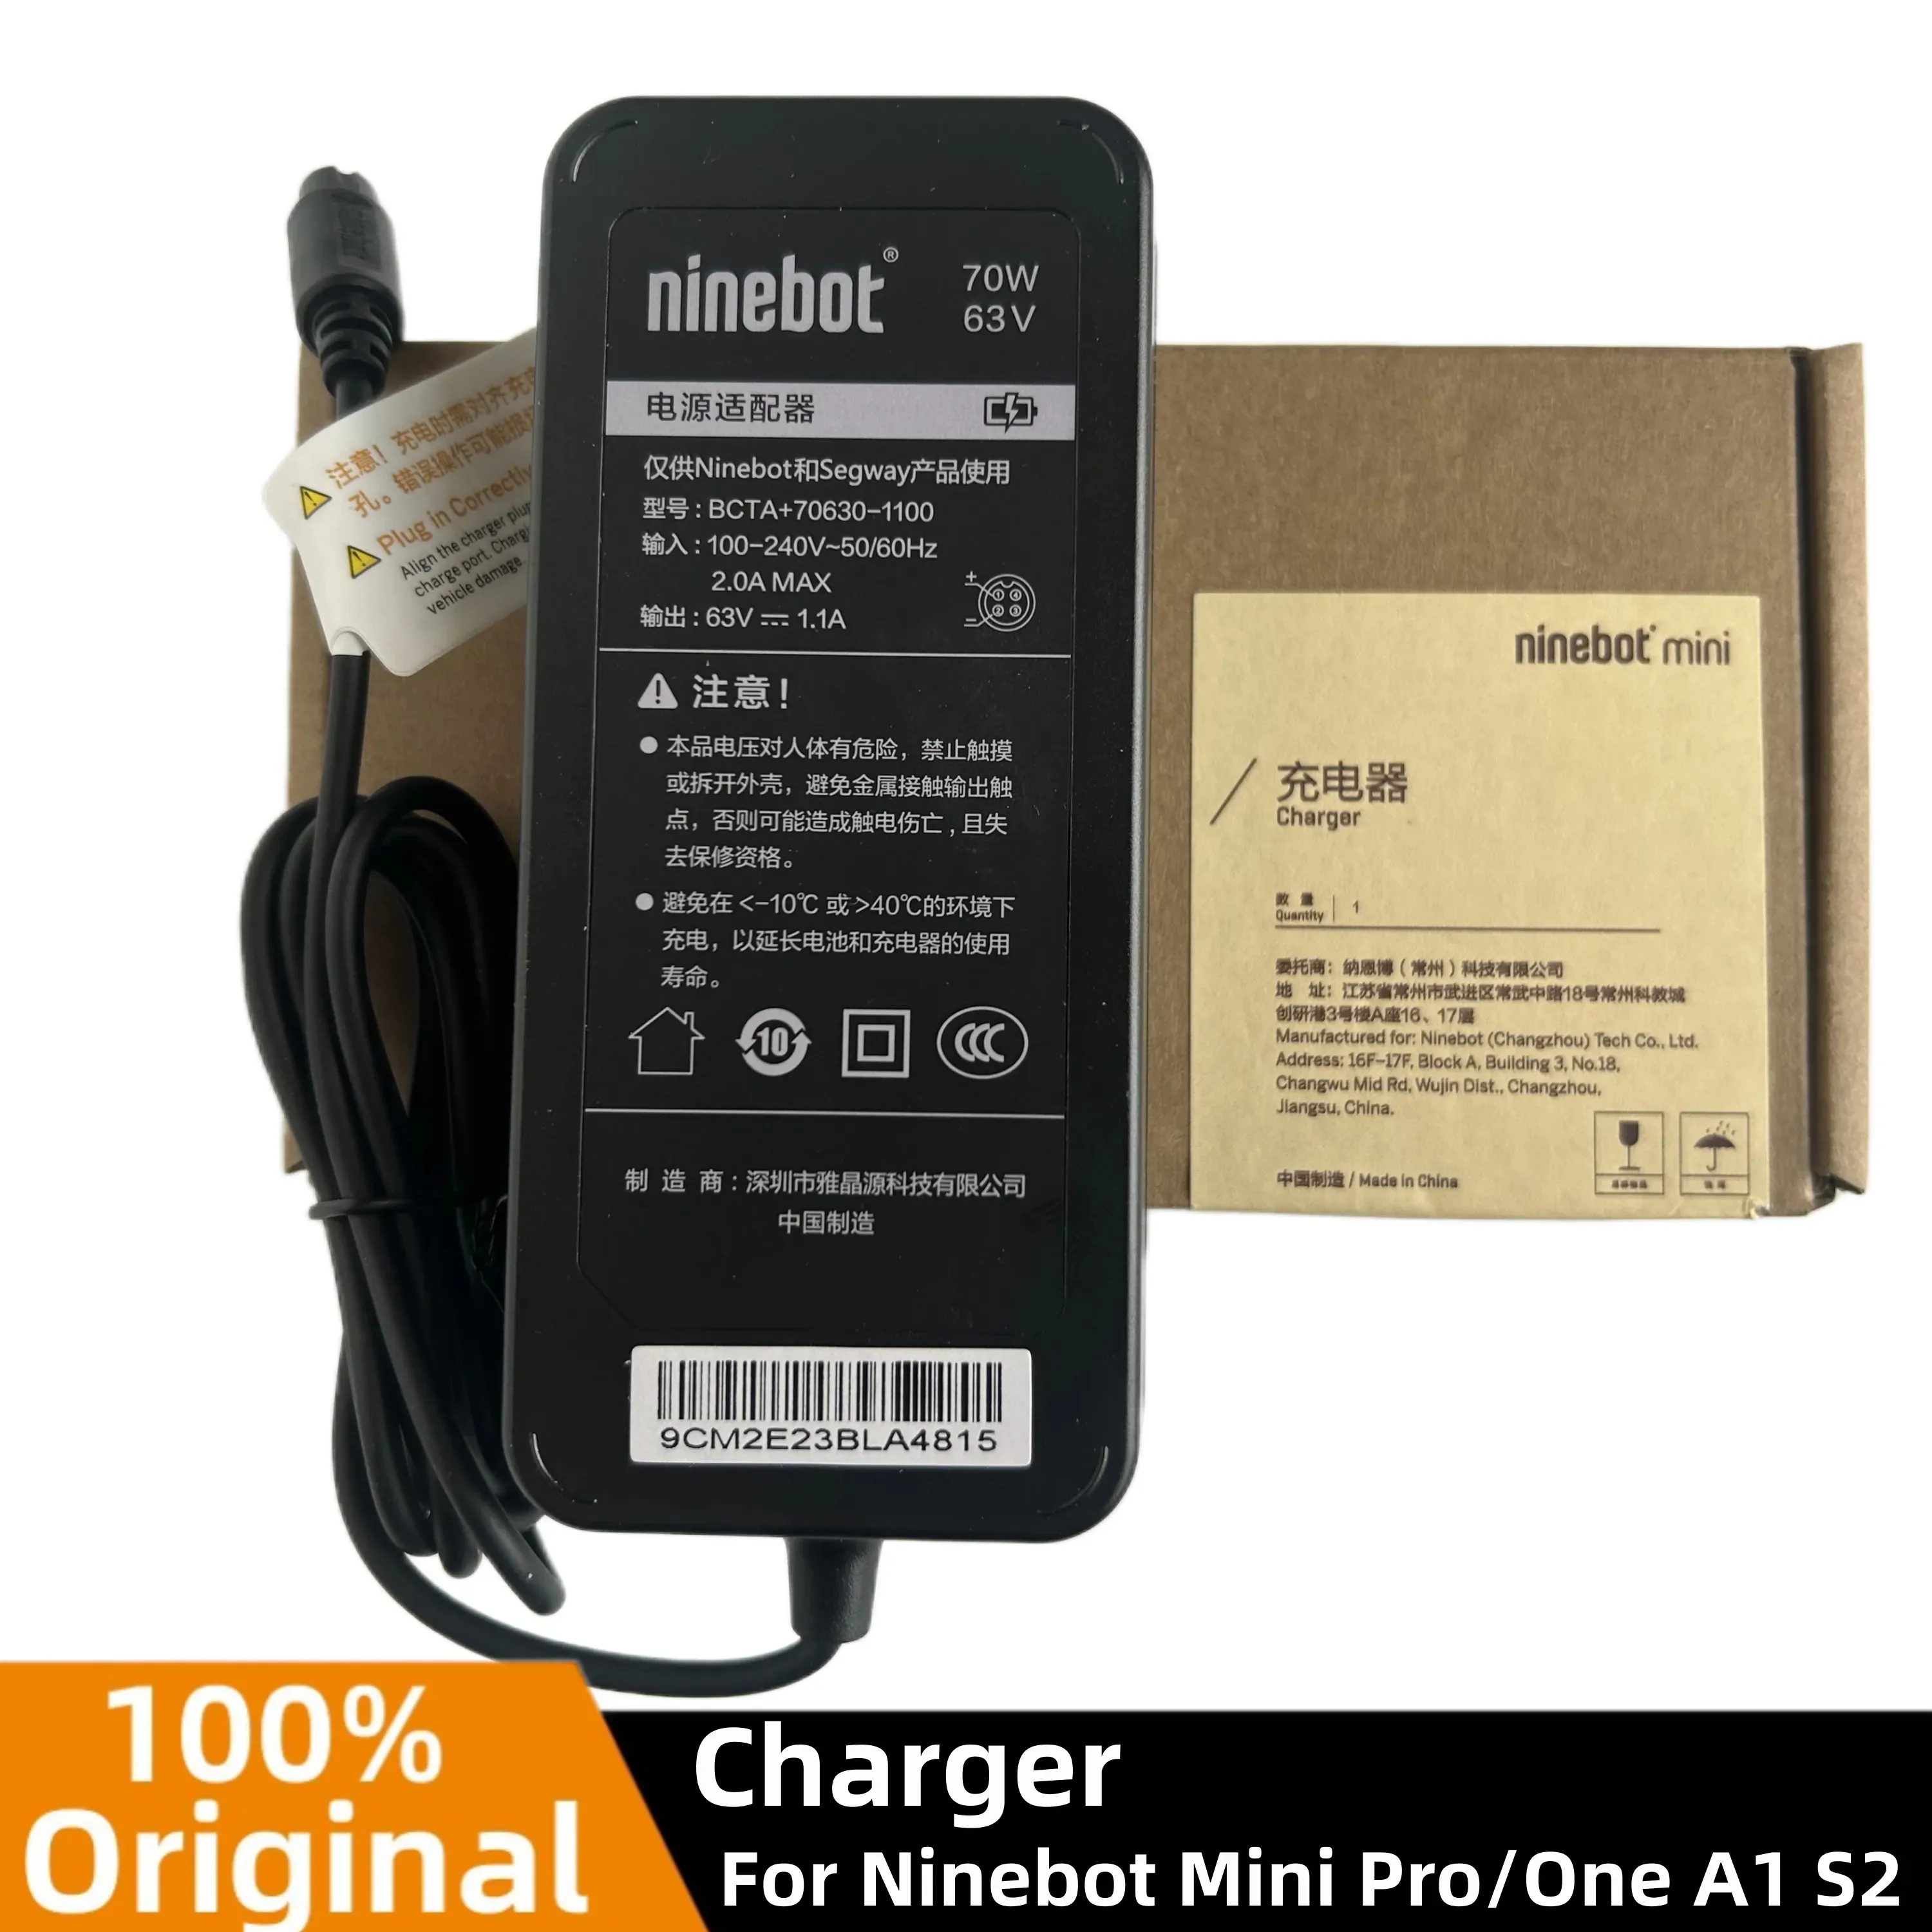 Original Ninebot Mini Pro Charger Battery Supply US Plug For Ninebot one A1 S2 63v 1.1a Charger Spare Parts